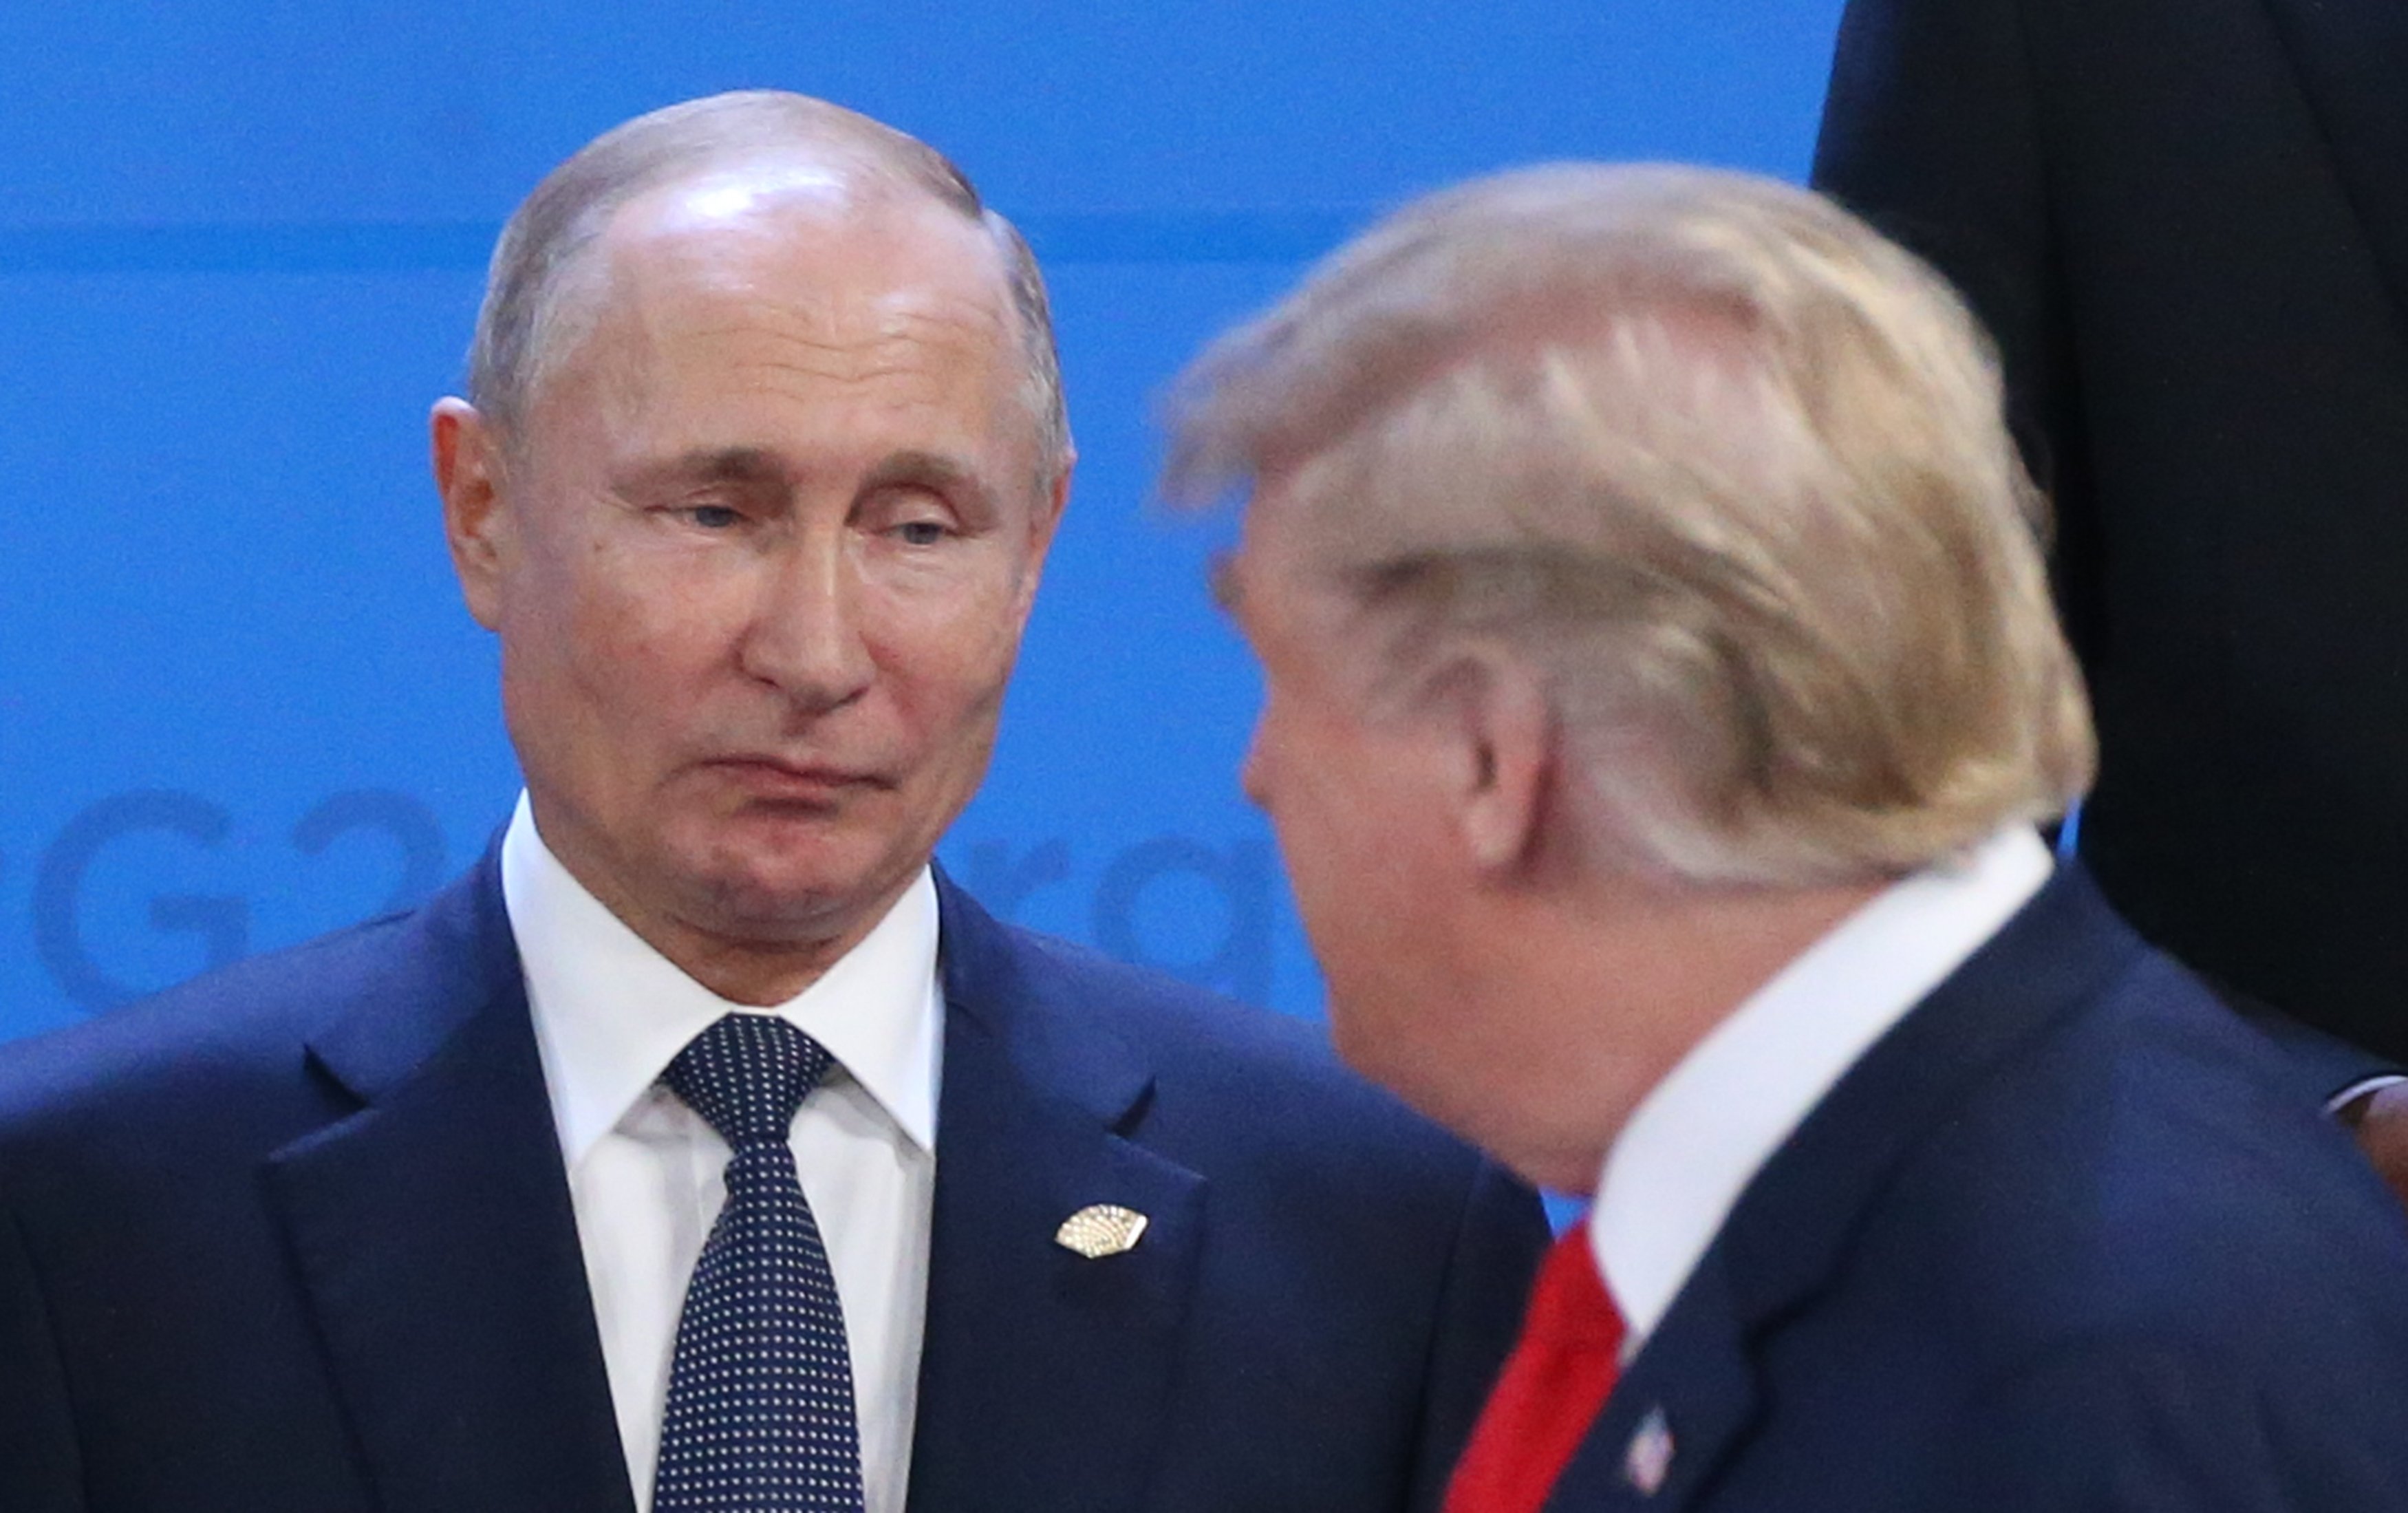 Russian President Vladimir Putin and U.S. President Donald Trump exchange looks during the opening ceremony of the G20 Summit's Plenary Meeting in Buenos Aires, Argentina | Photo: Getty Images